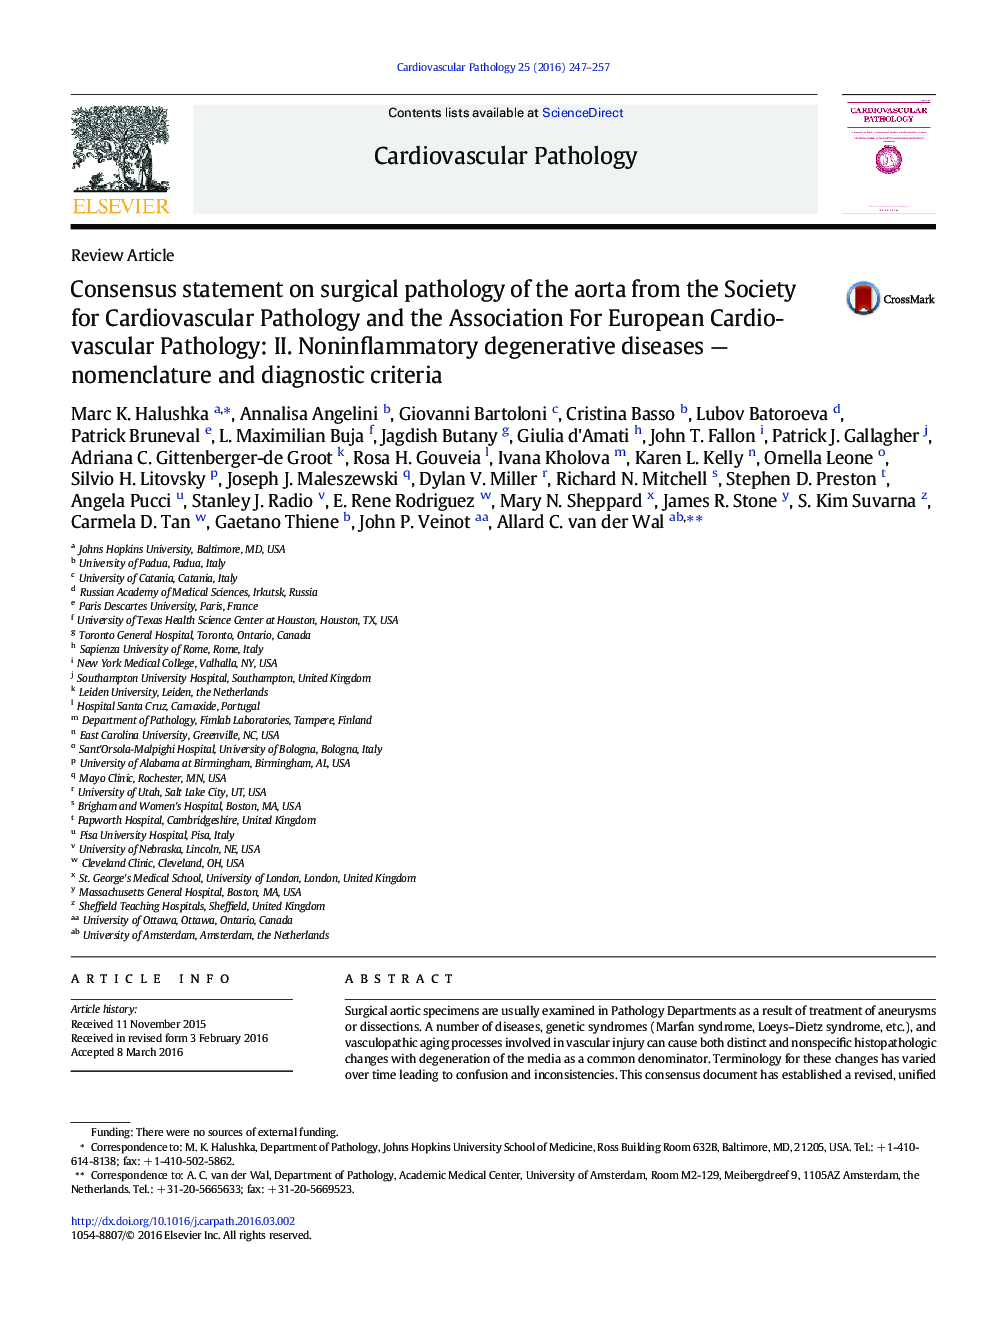 Consensus statement on surgical pathology of the aorta from the Society for Cardiovascular Pathology and the Association For European Cardiovascular Pathology: II. Noninflammatory degenerative diseases - nomenclature and diagnostic criteria